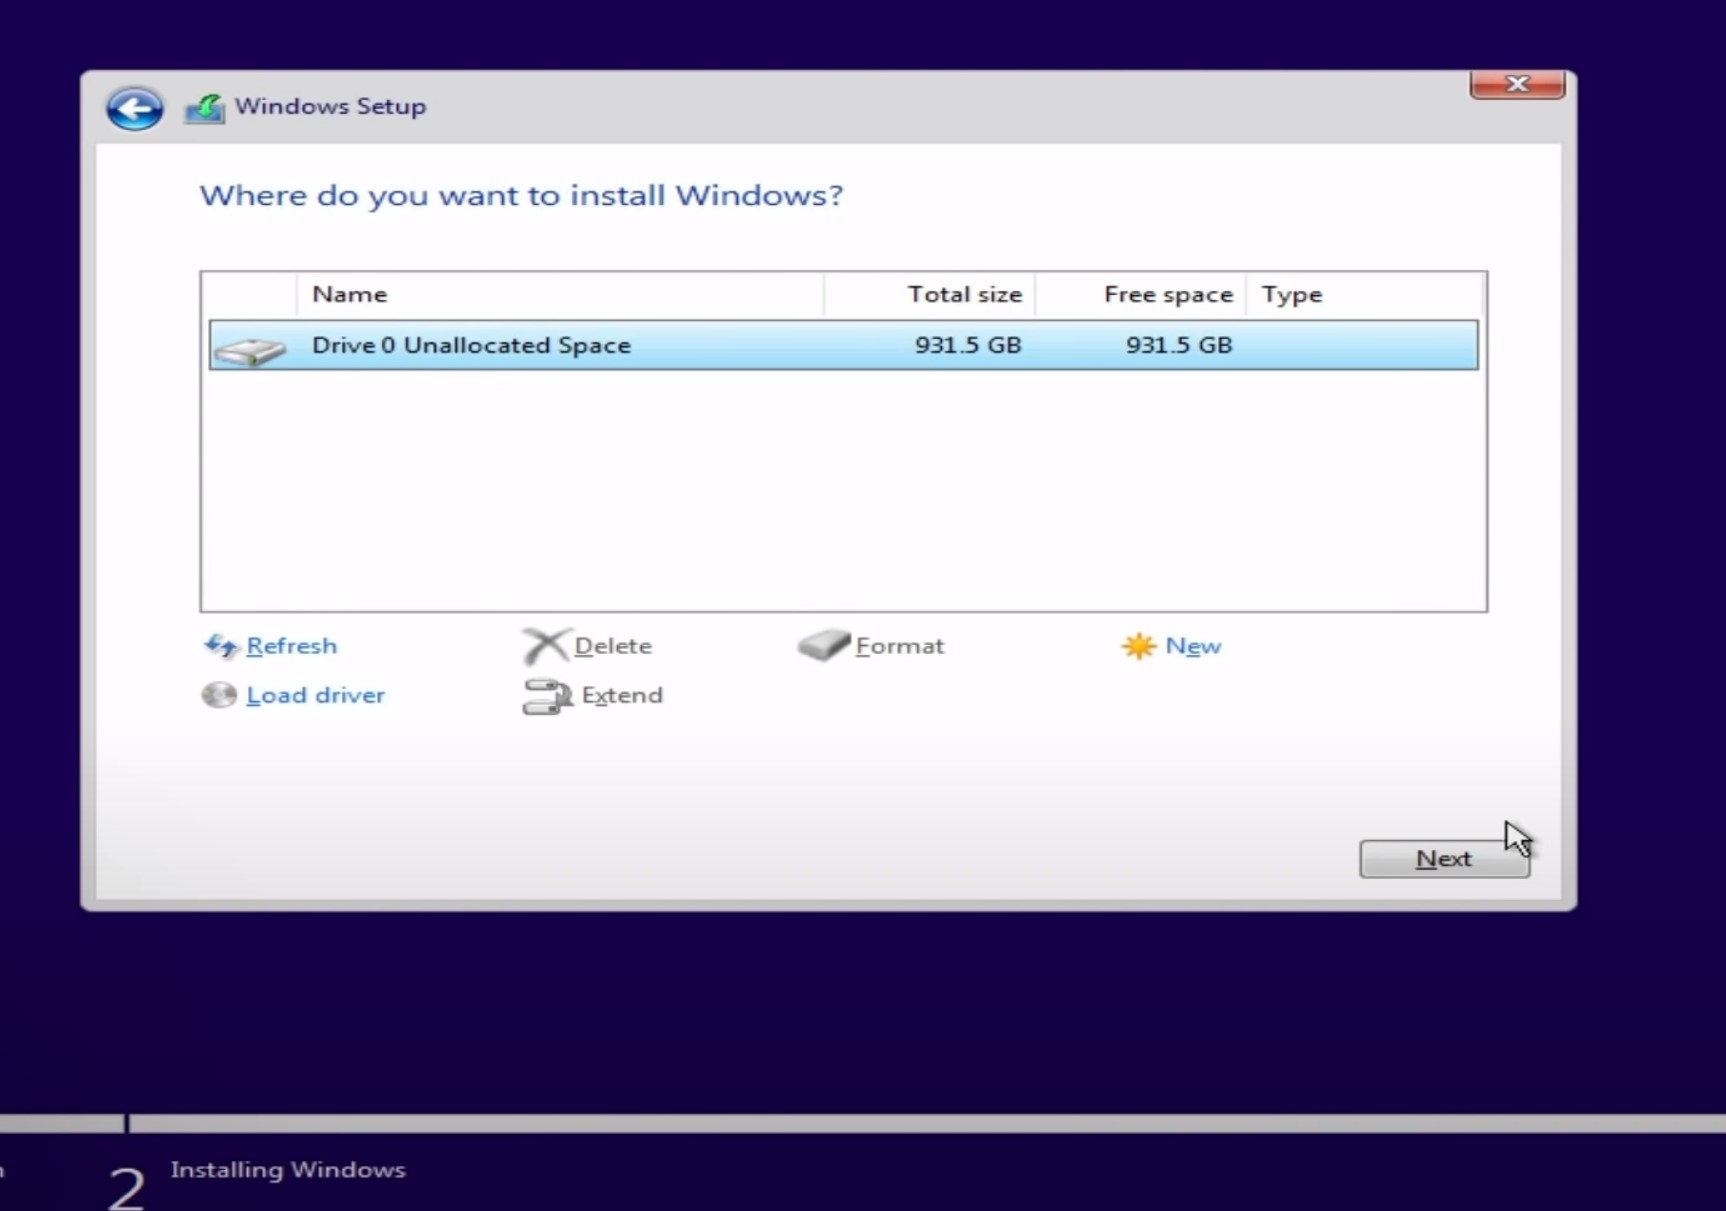 Windows 11 Download: How to Download and Install Windows 11 [2 Ways]